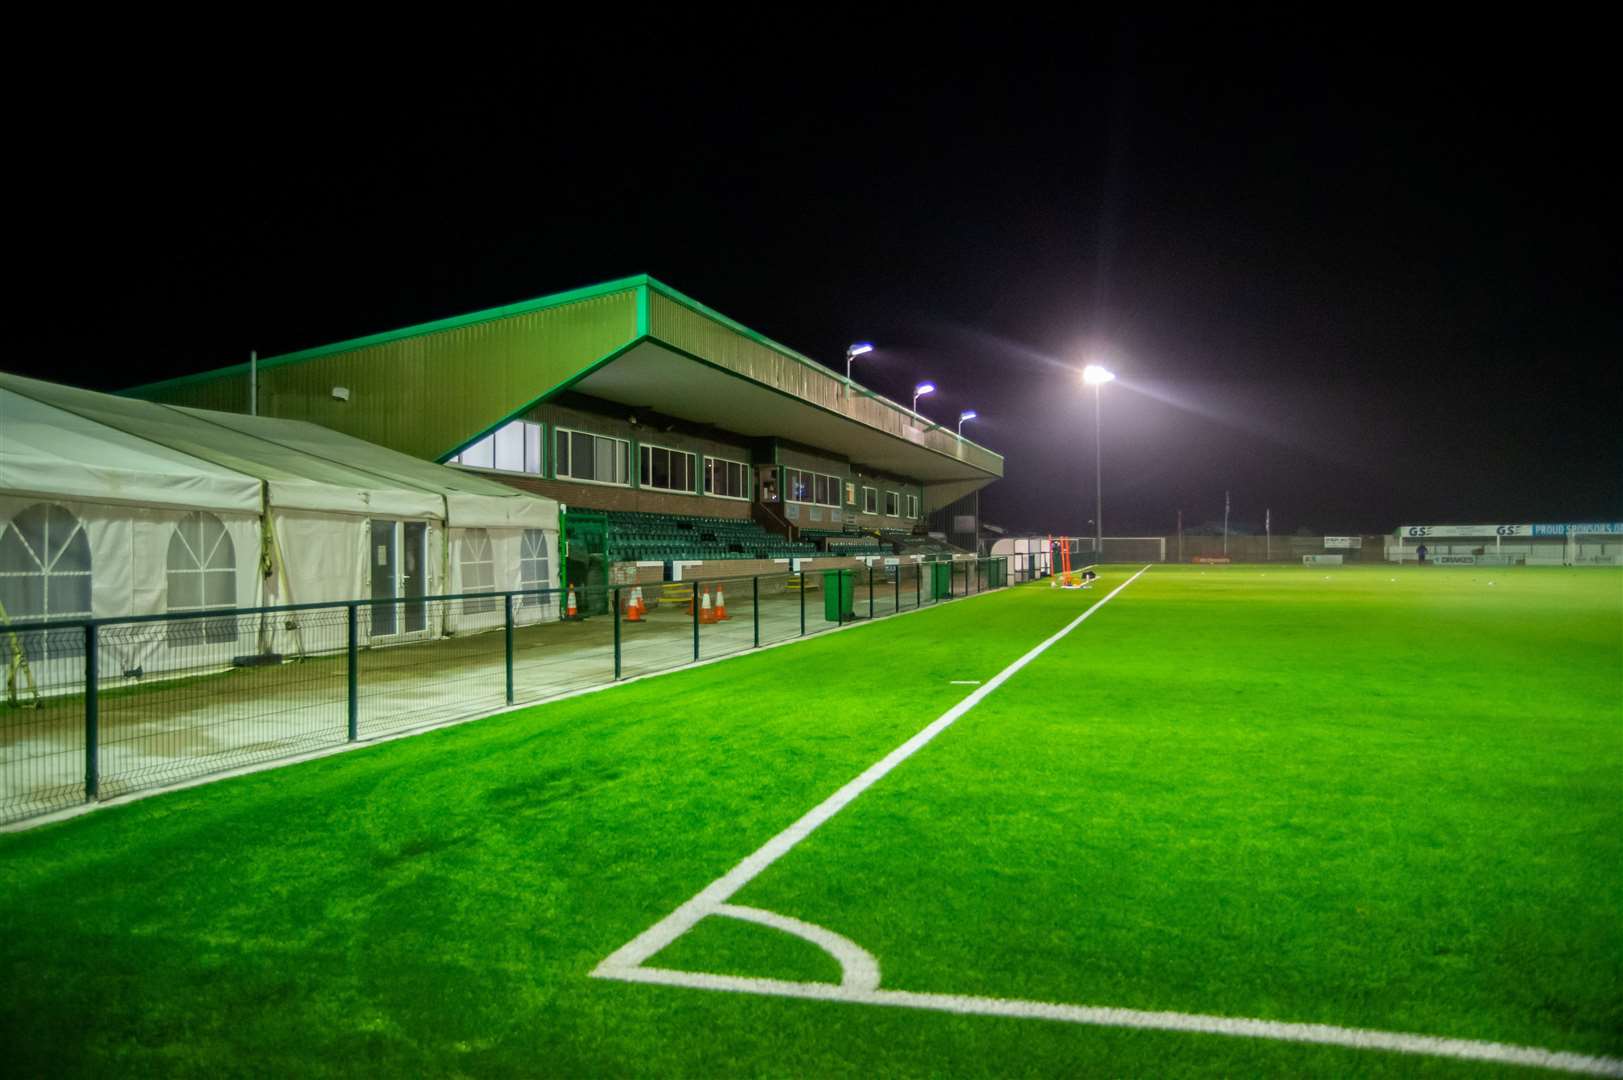 The new 3G pitch at Ashford United's Homelands ground. Picture: Ian Scammell